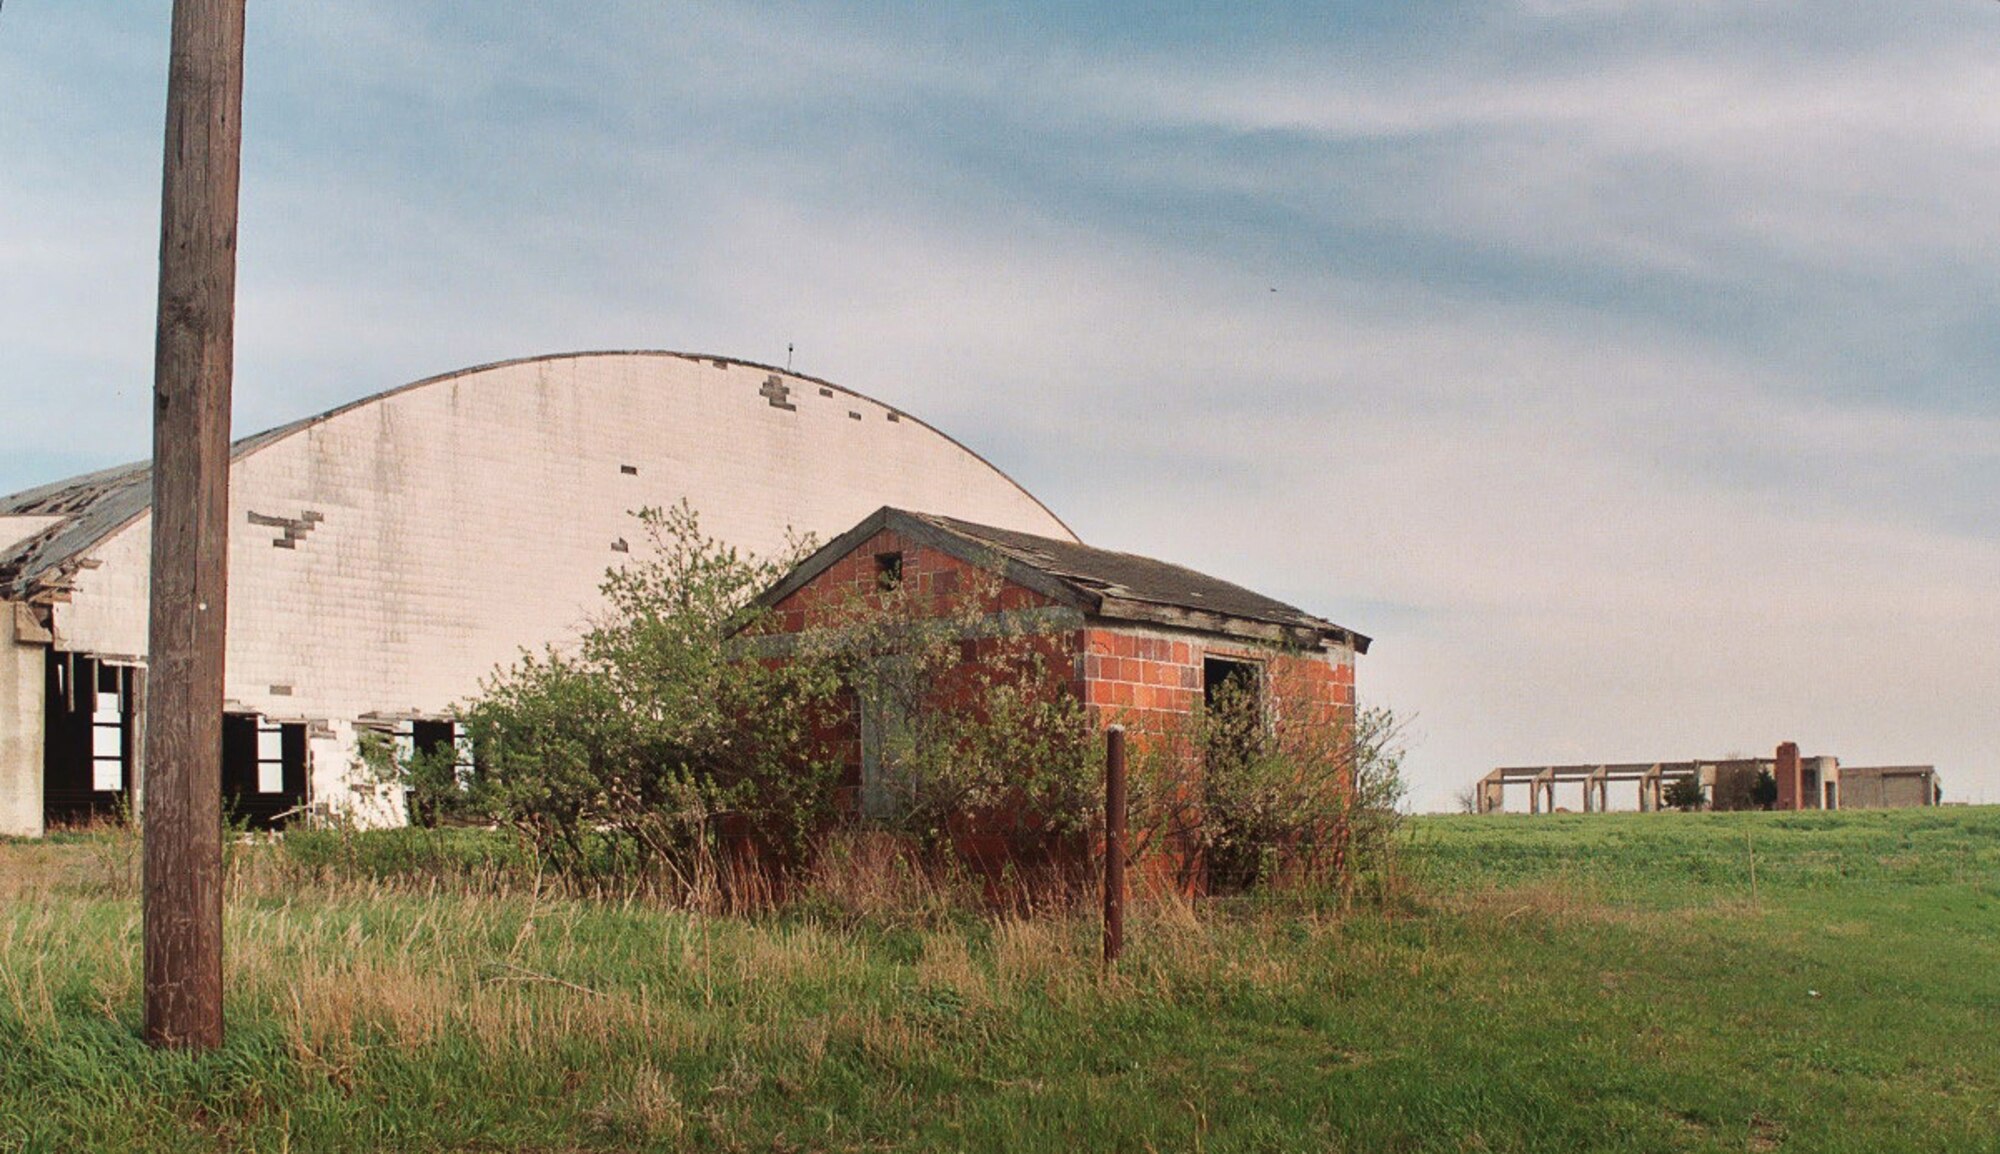 The remains of a water pump house stand on the former location of Bruning Army Air Field, Neb., in this photo taken on July 17, 2004.  The 507th Fighter Group, the precursor to the modern-day 507th Air Refueling Wing, was activated at Bruning AAF in 1944.  (U.S. Air Force photo by Lt. Col. [ret.] Donald Klinko)